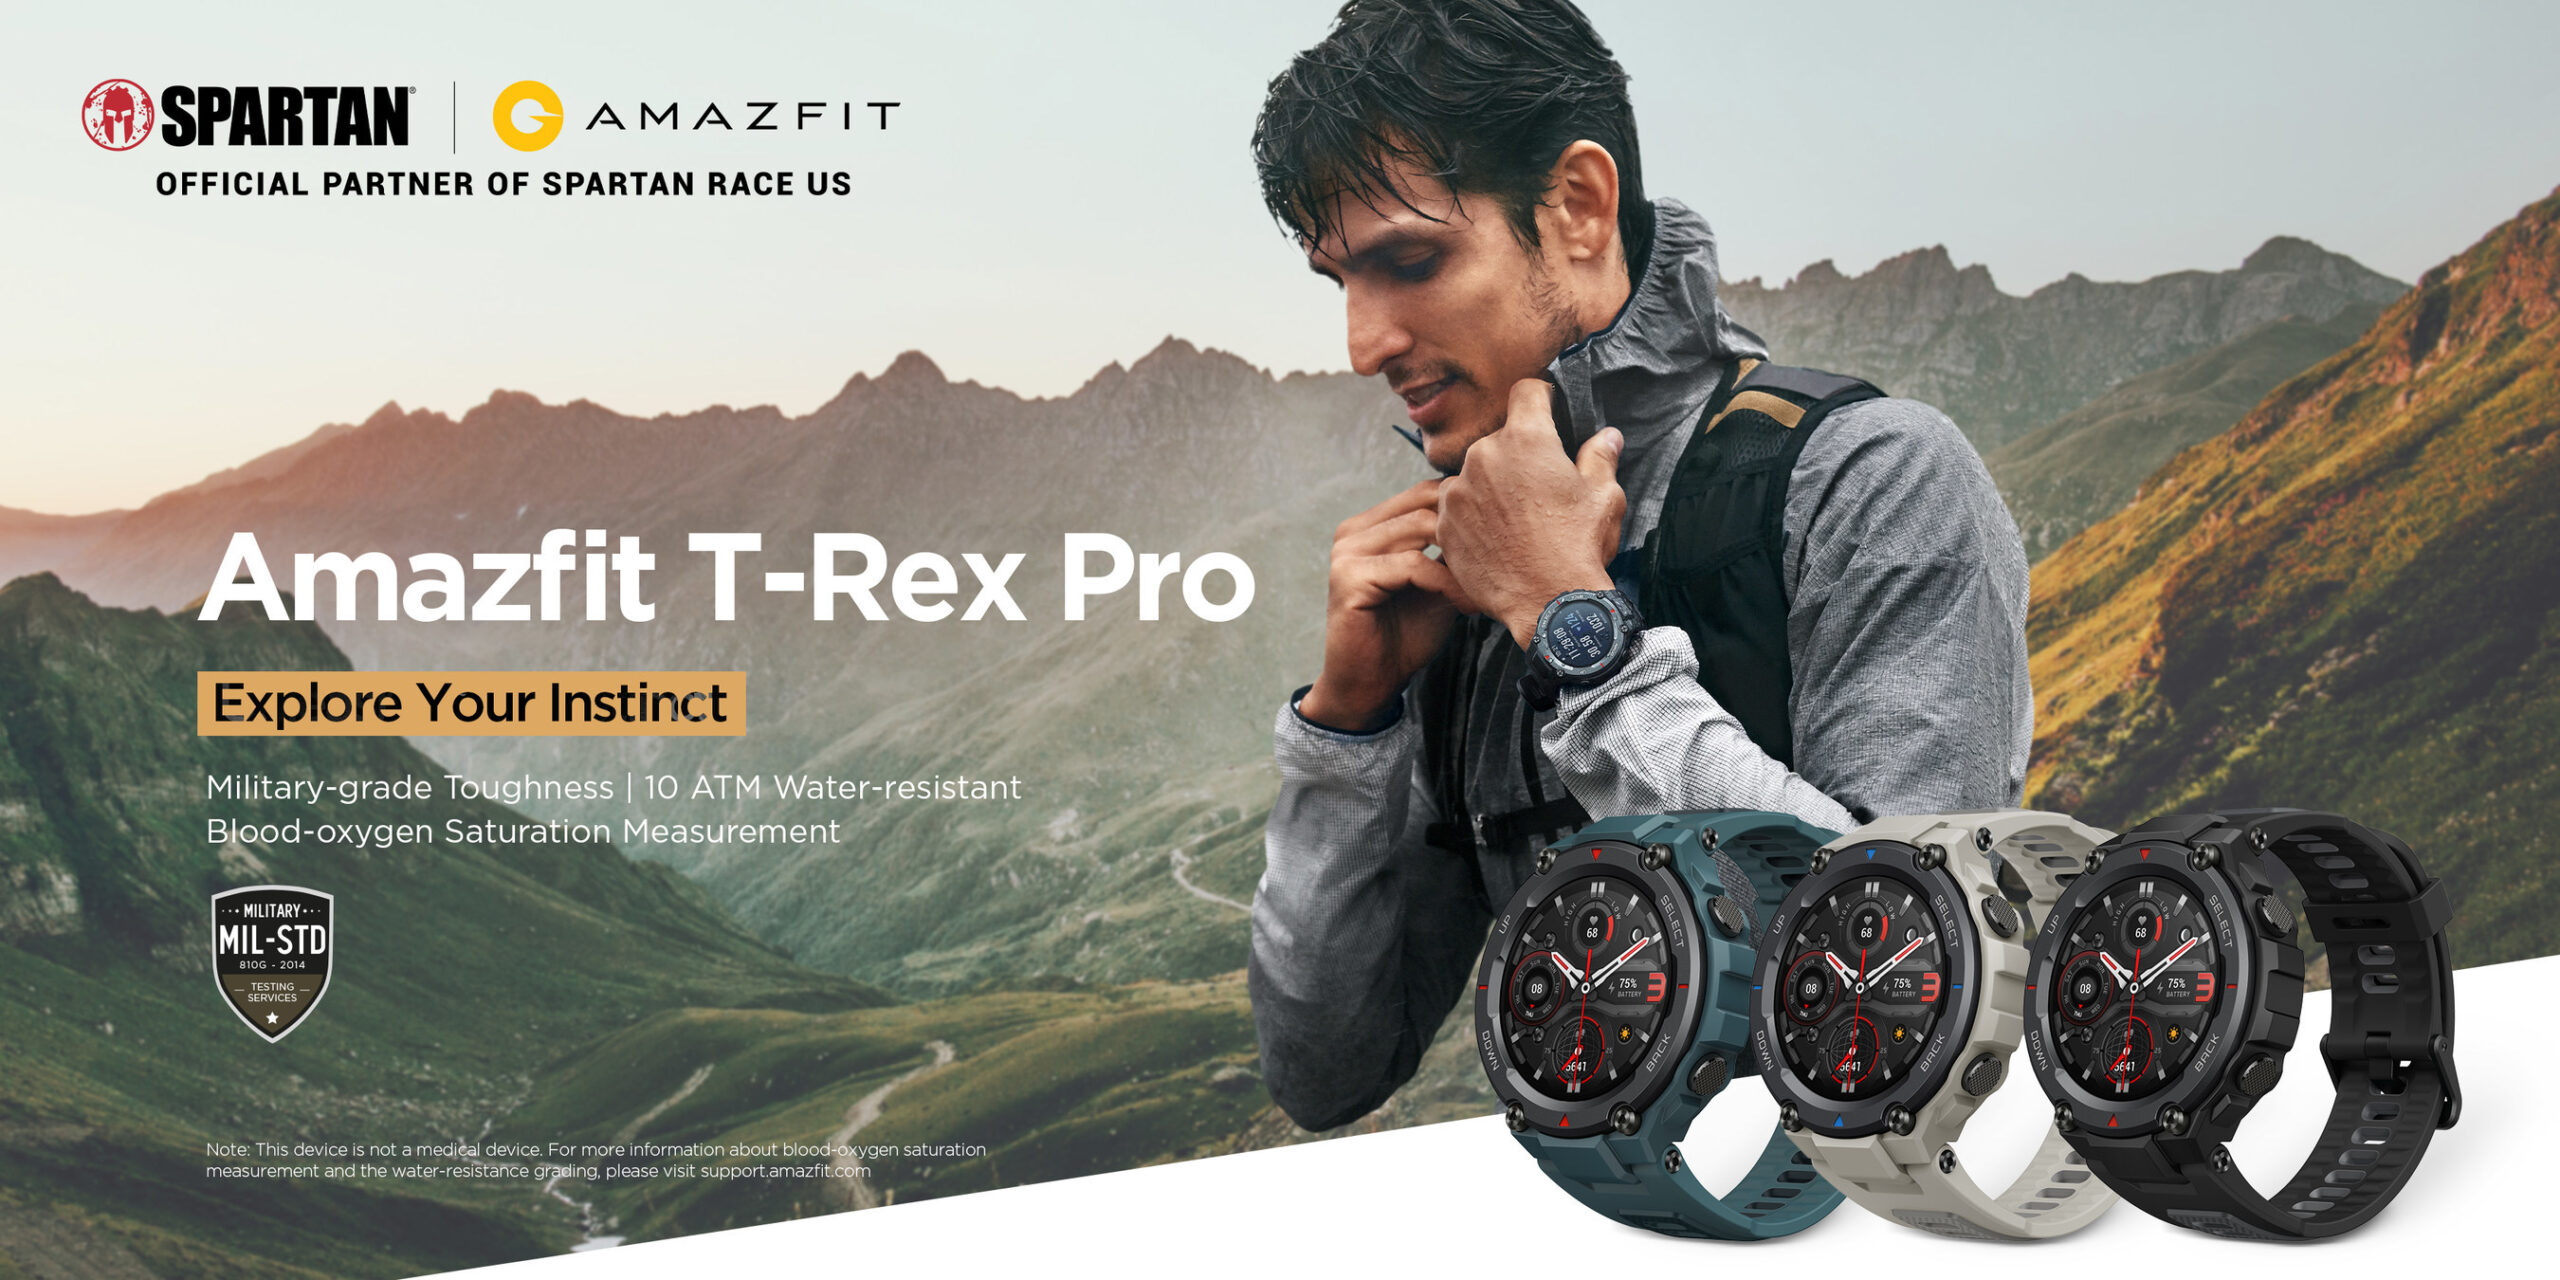 Amazfit T-Rex Pro Will be Launched in Malaysia: A Tough Military-grade Smartwatch with Endurance to Match Your Own and up to 18 Days’ Battery Life[1]